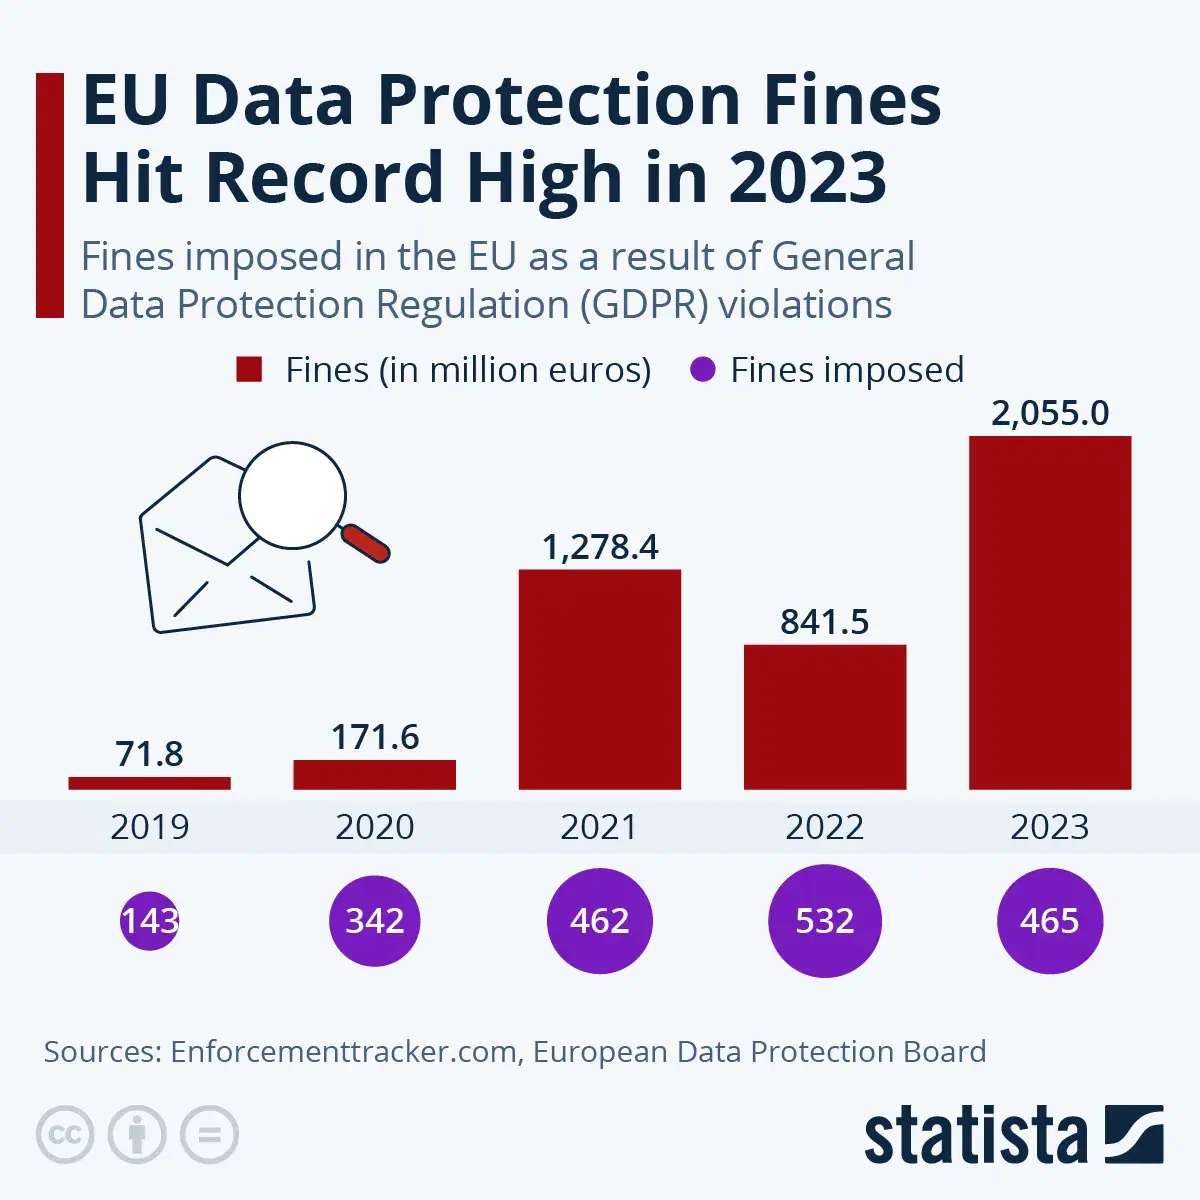 EU Data Protection Fines Hit Record High in 2023